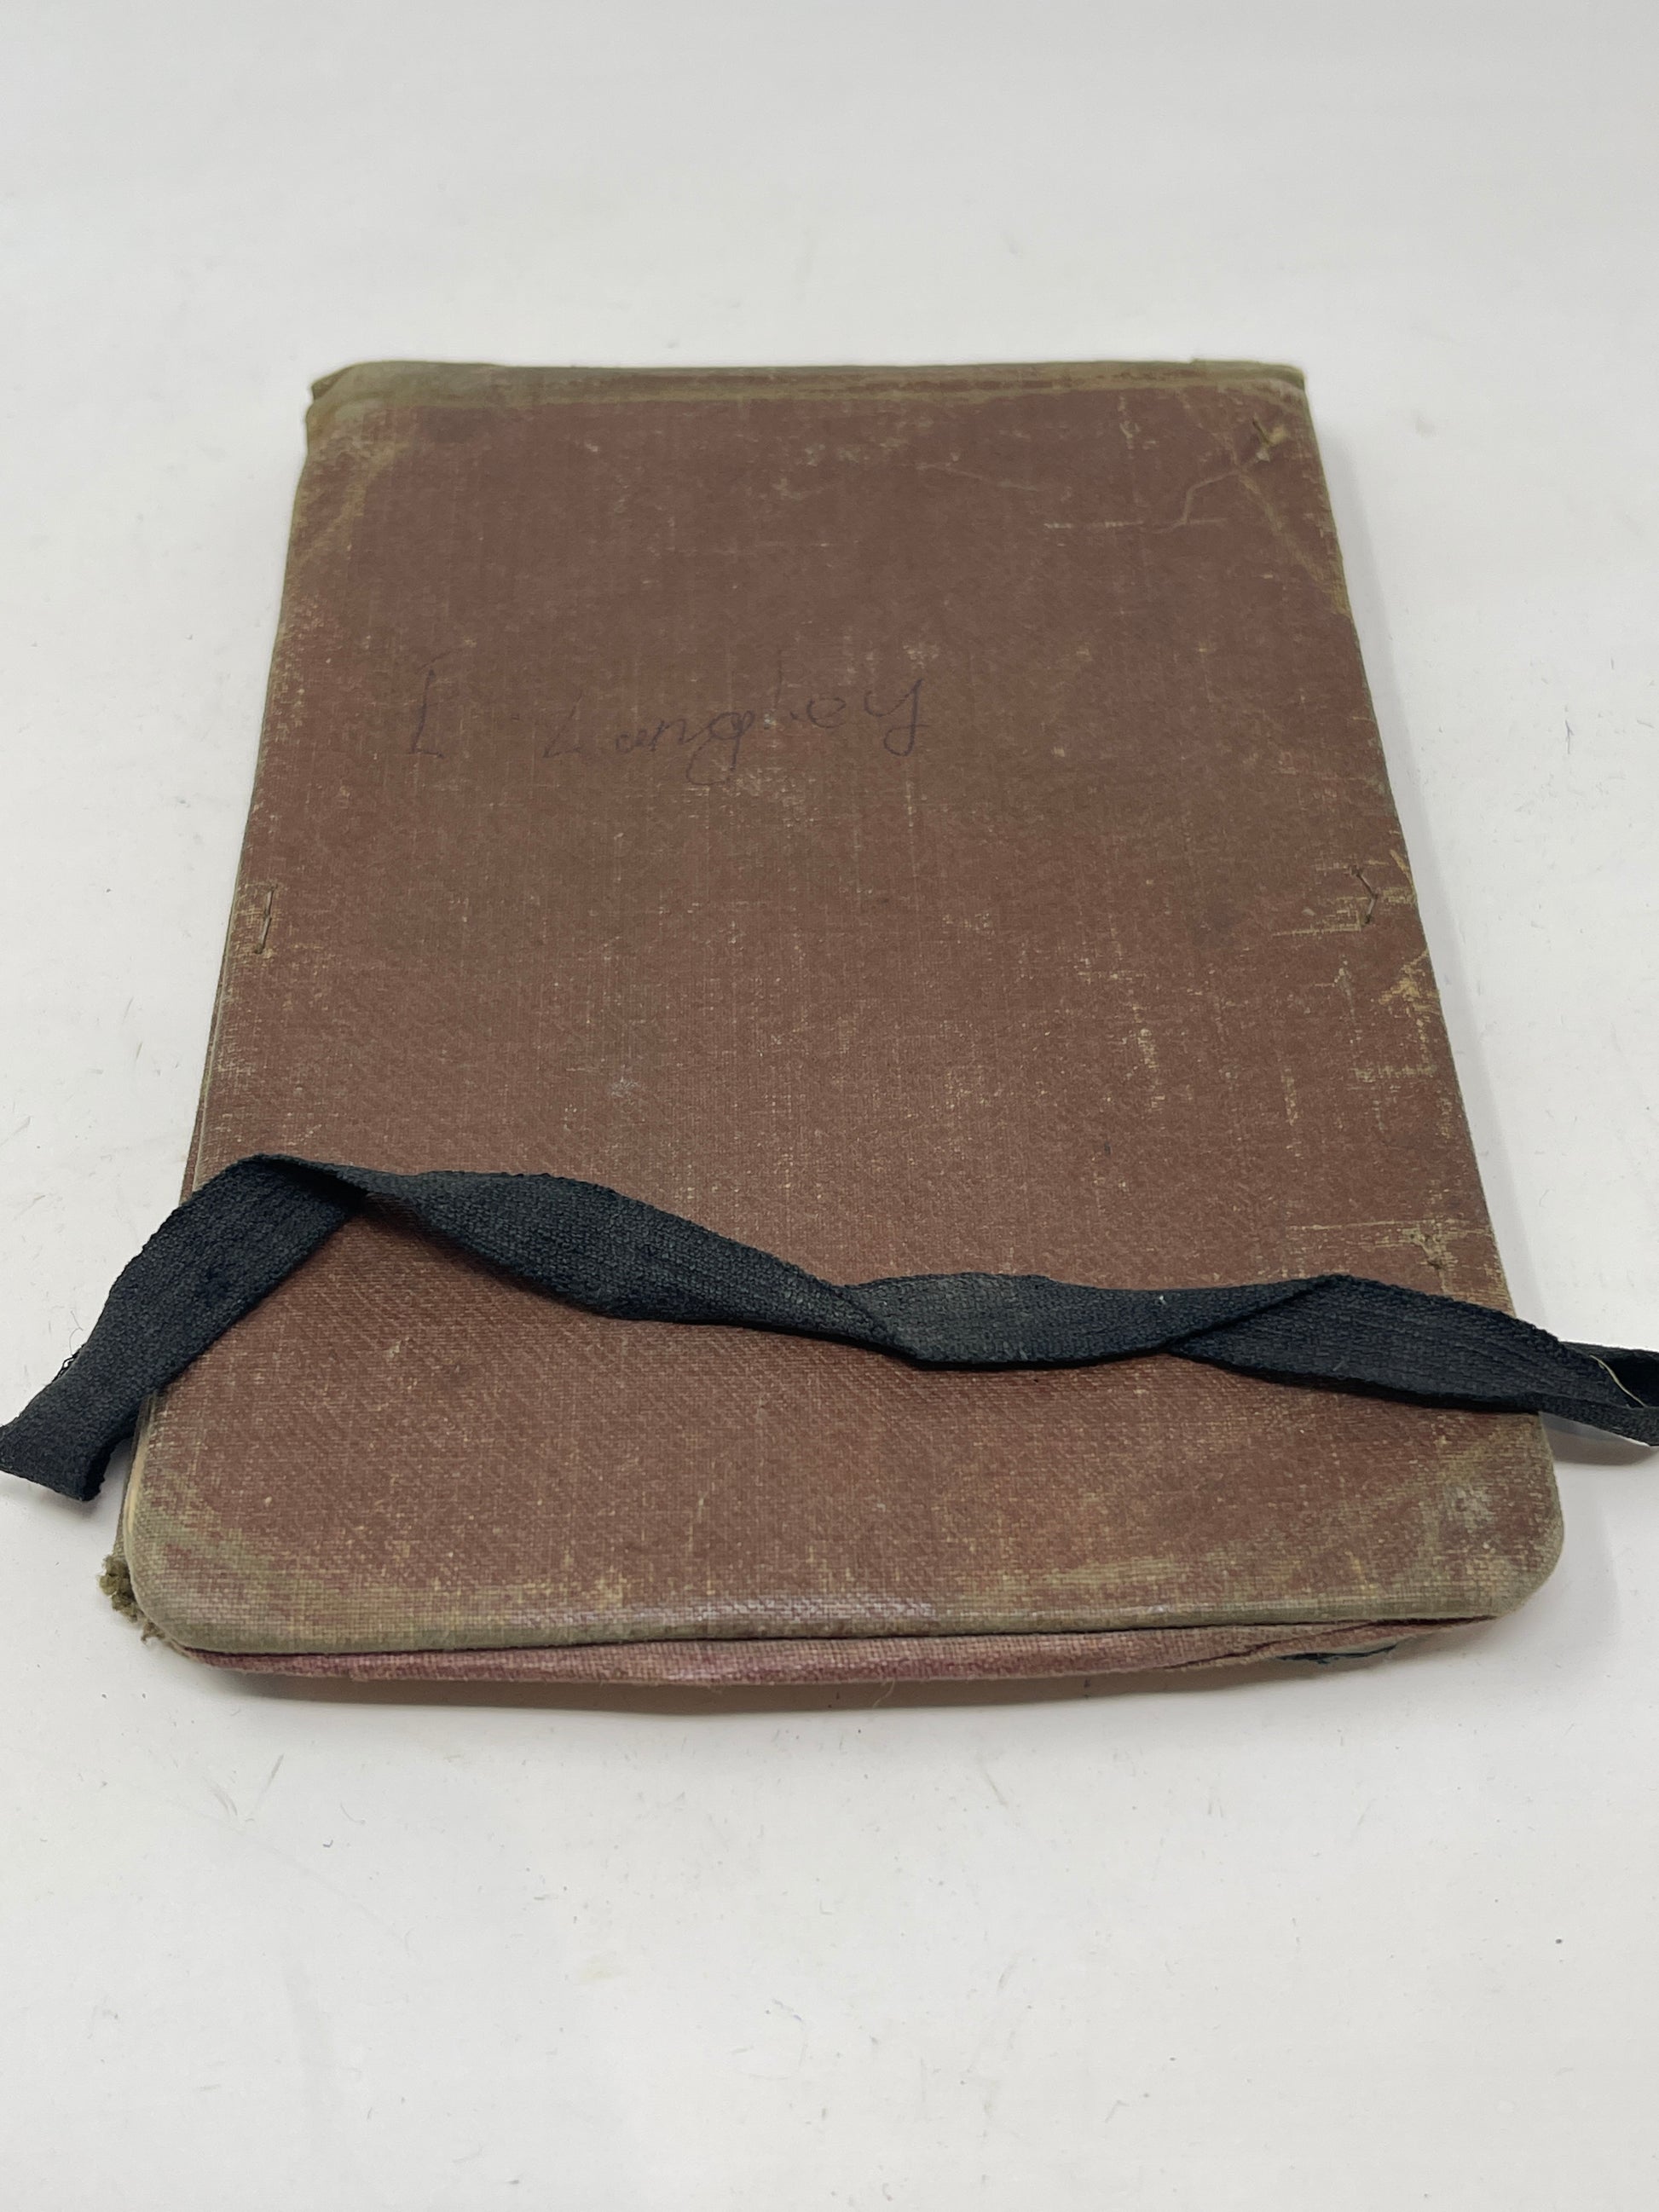 The book contains handwritten notes relating to the Vickers Machine Gun  Army Book 153 is the Army issue notebook that was issued to Officers and NCOs to keep in their pockets when on active service.  The notebook contains a hardback cover with a brown waterproof fabric  Elastic strap to keep the book closed   removable paper notepad